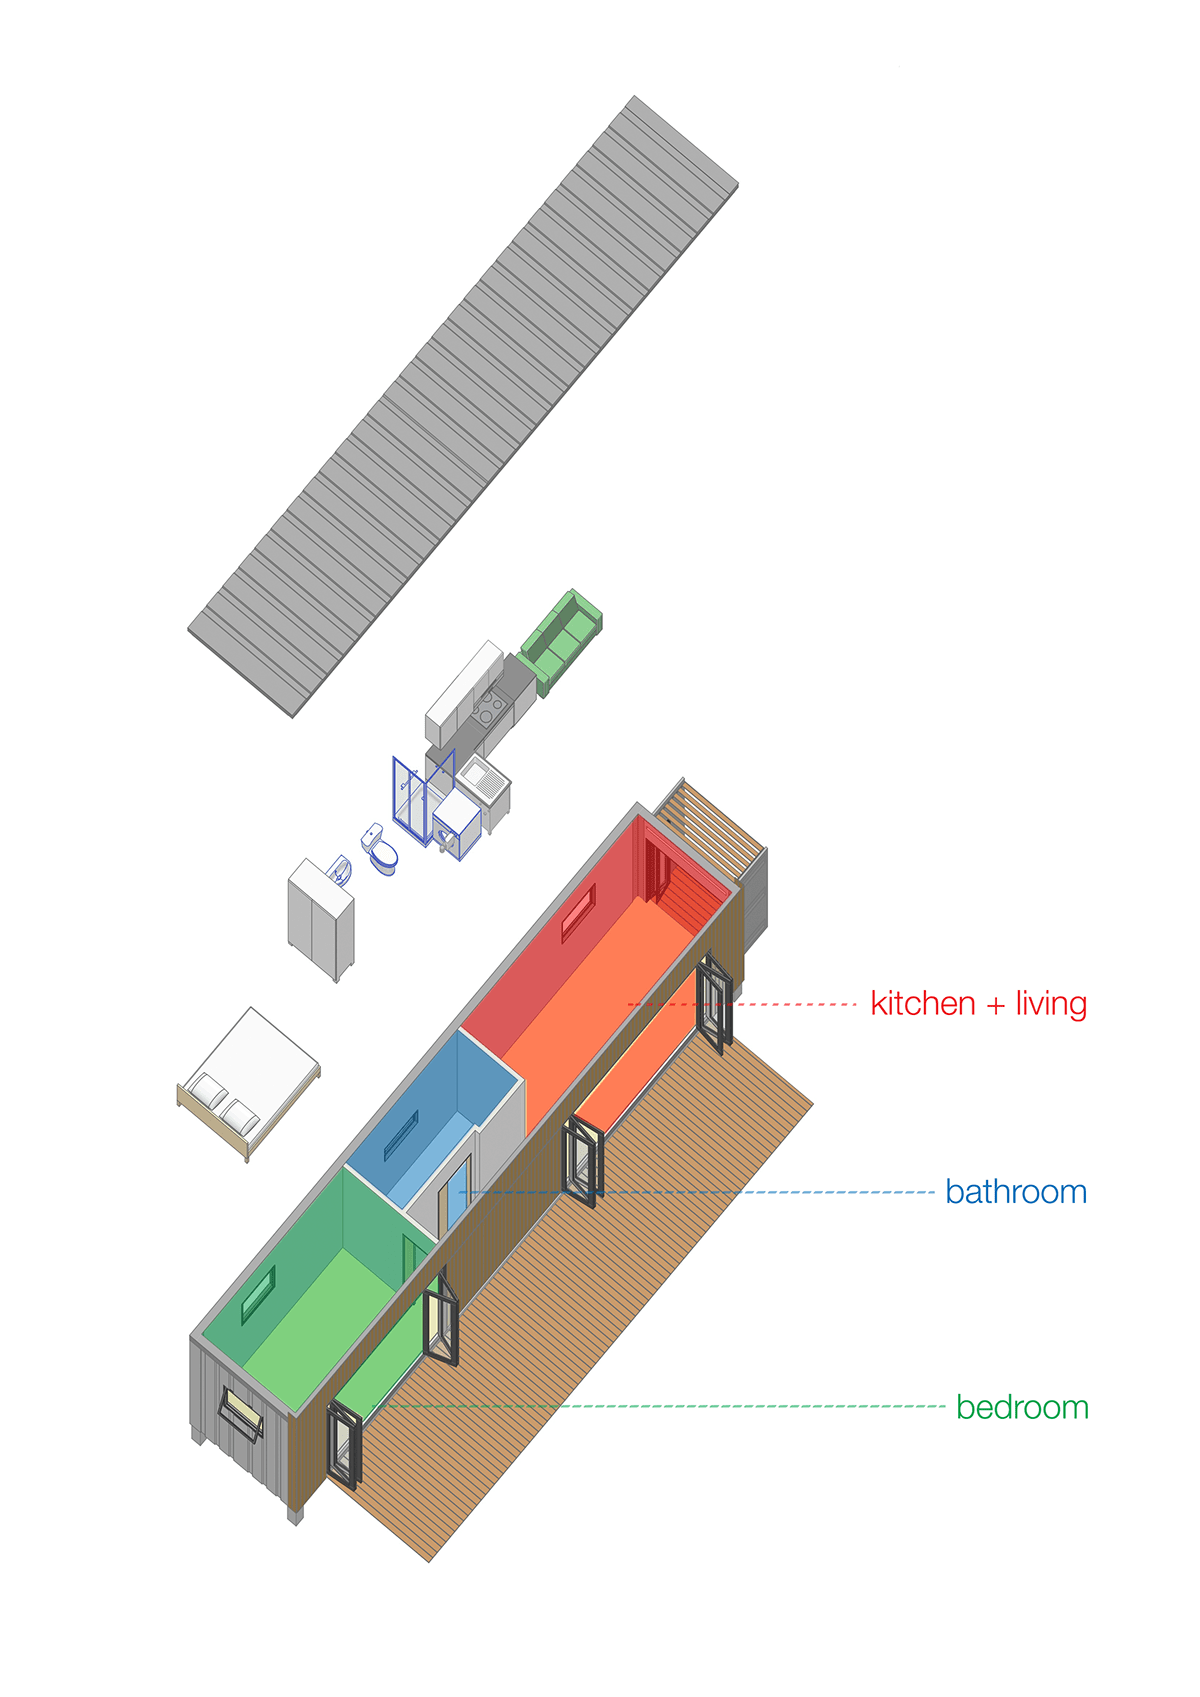 Axonometric illustration of container home assembly